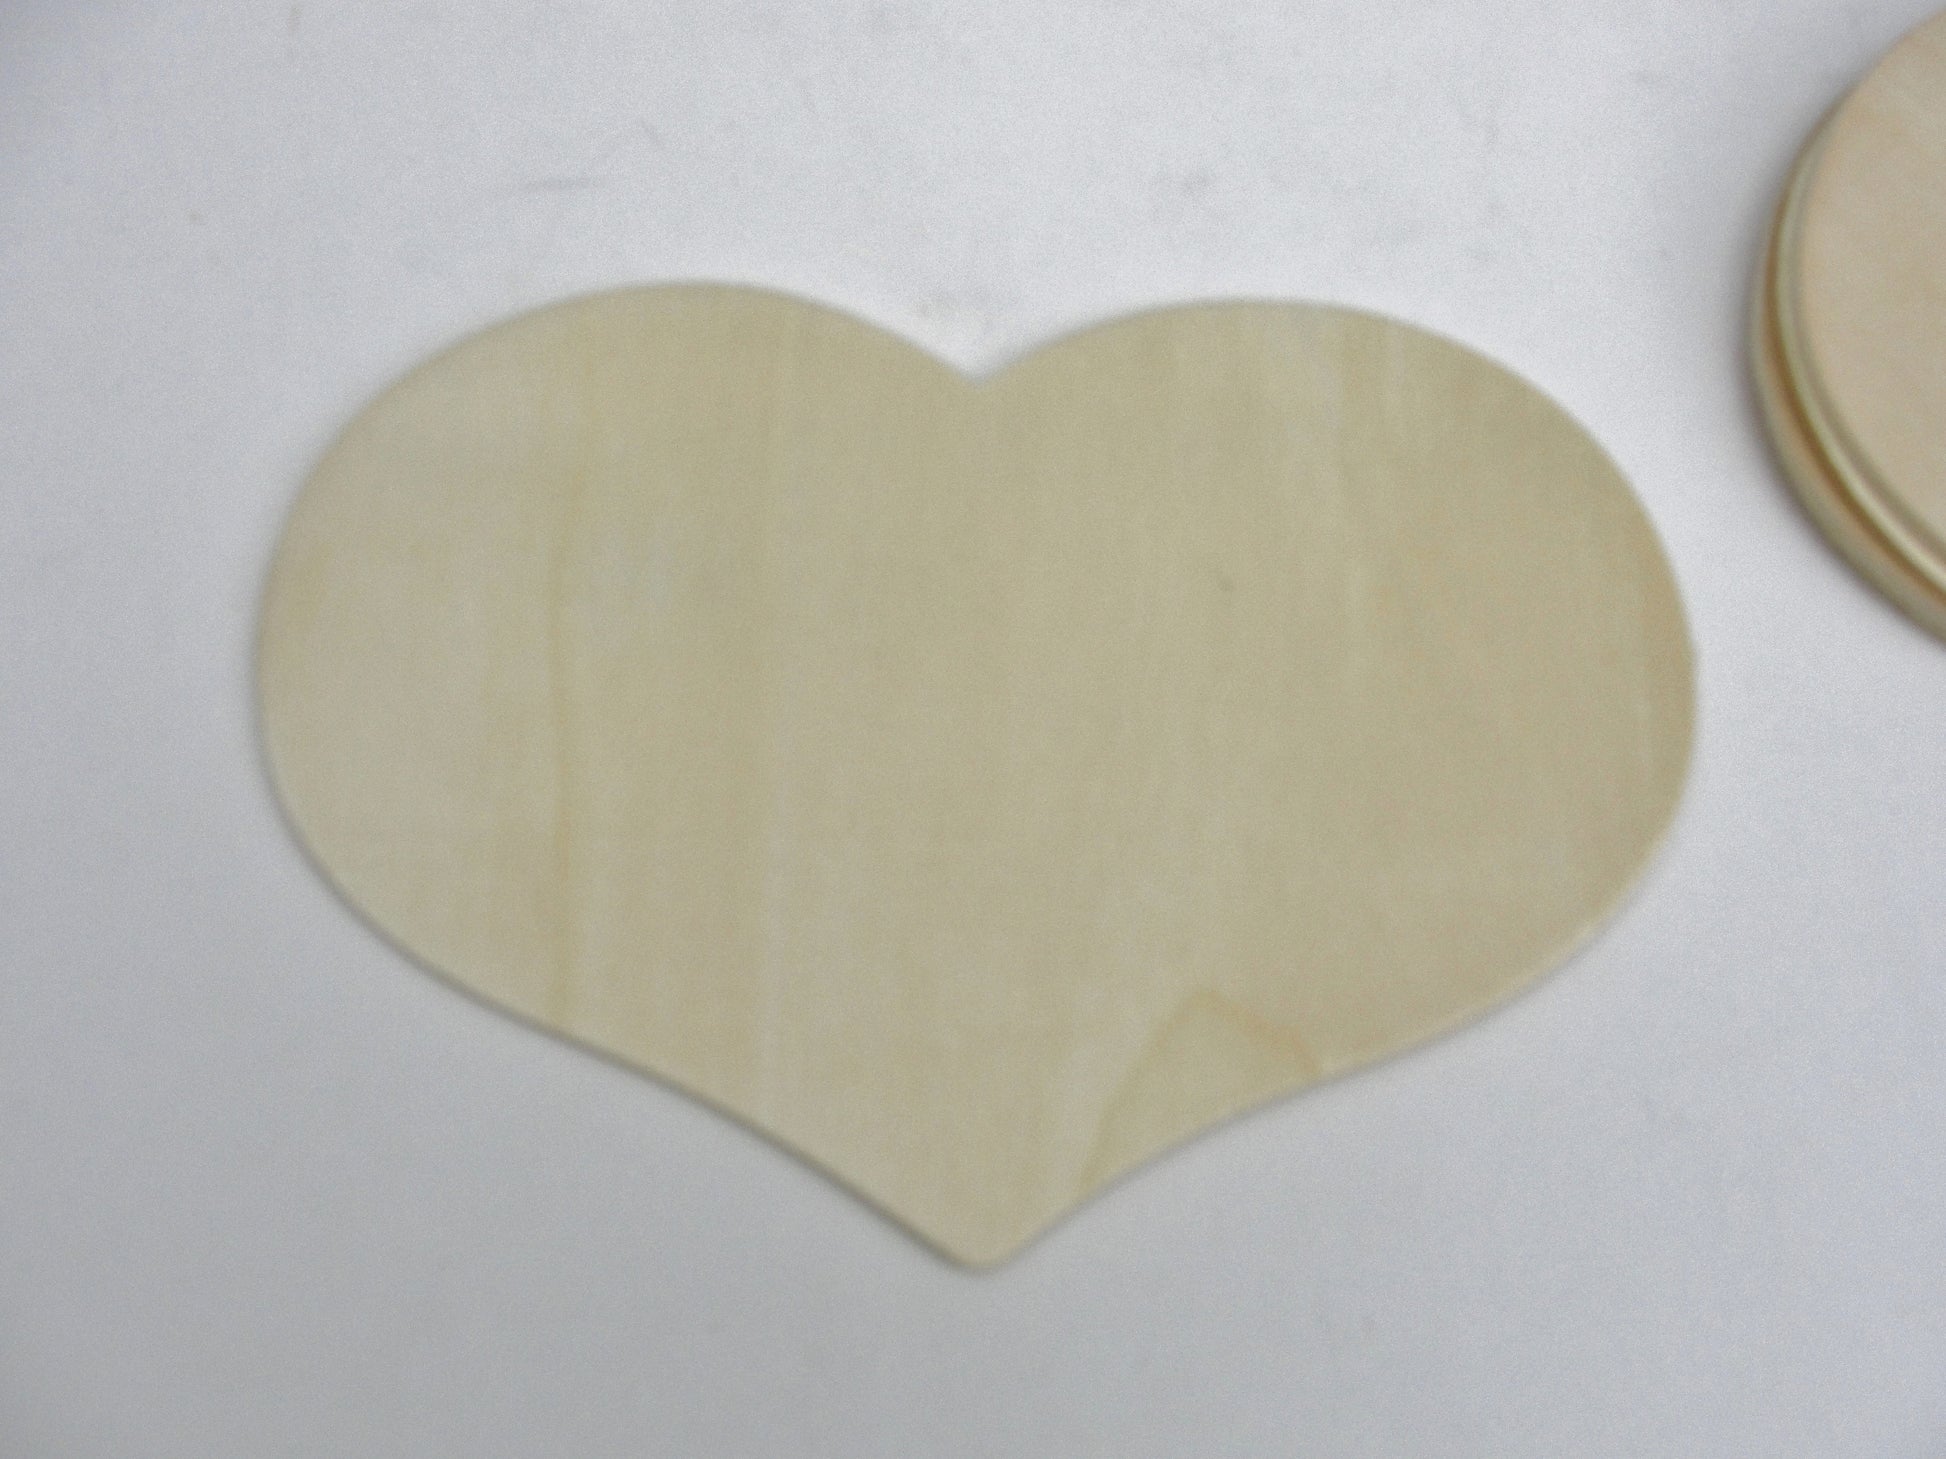 Large wooden 6" hearts unfinished - Wood parts - Craft Supply House